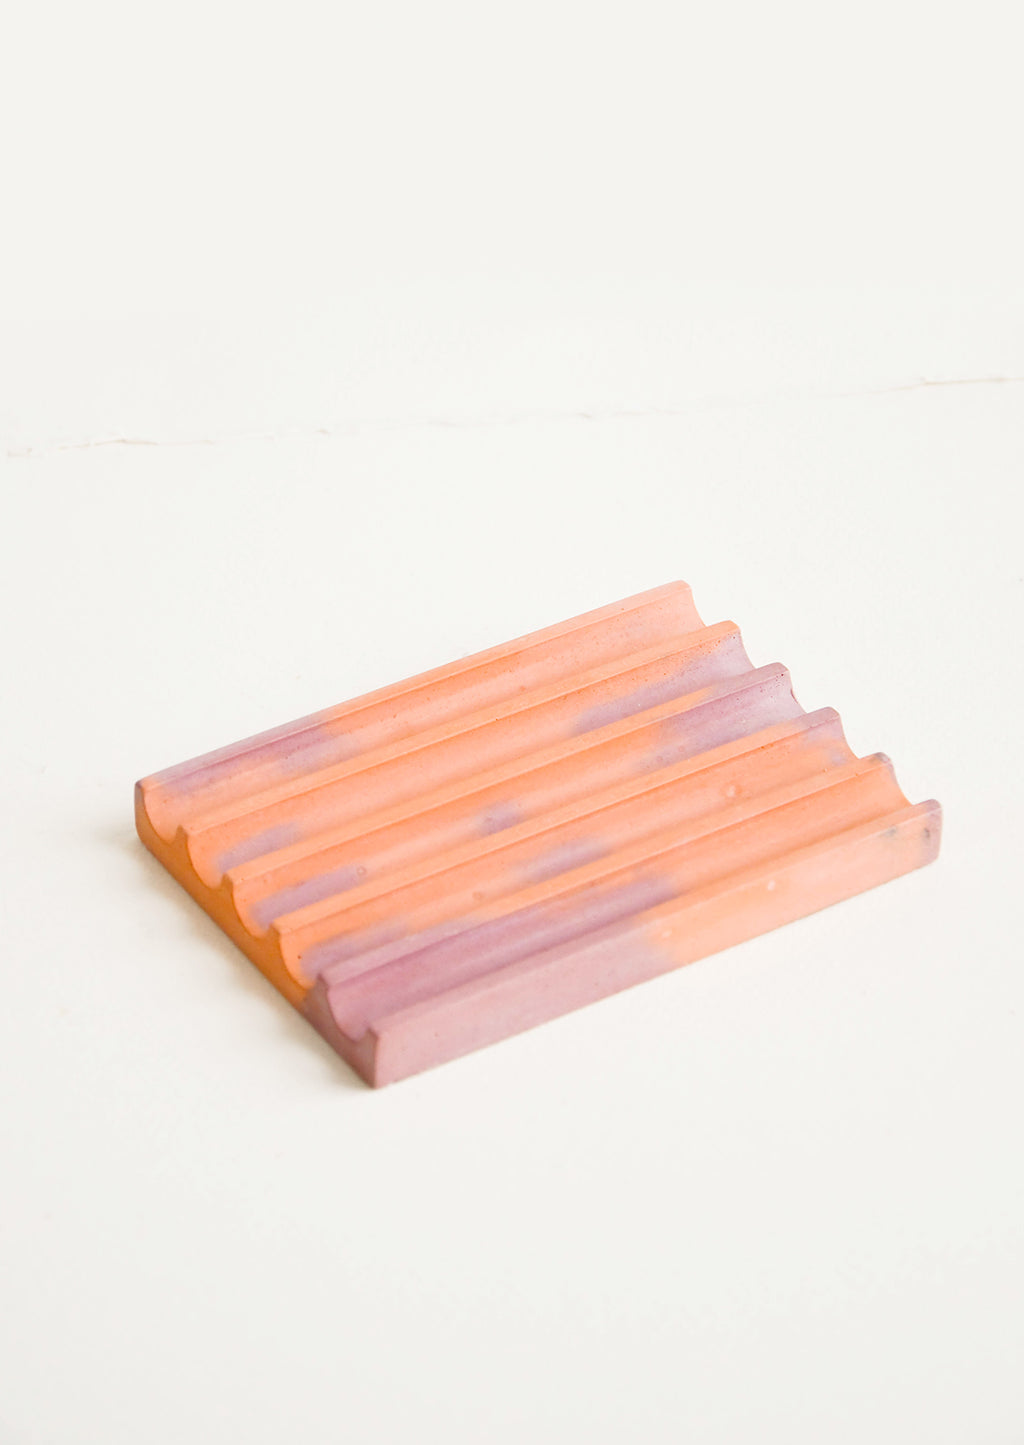 Coral / Mauve: A marbled coral and mauve smooth concrete soap dish with troughs and ridges.